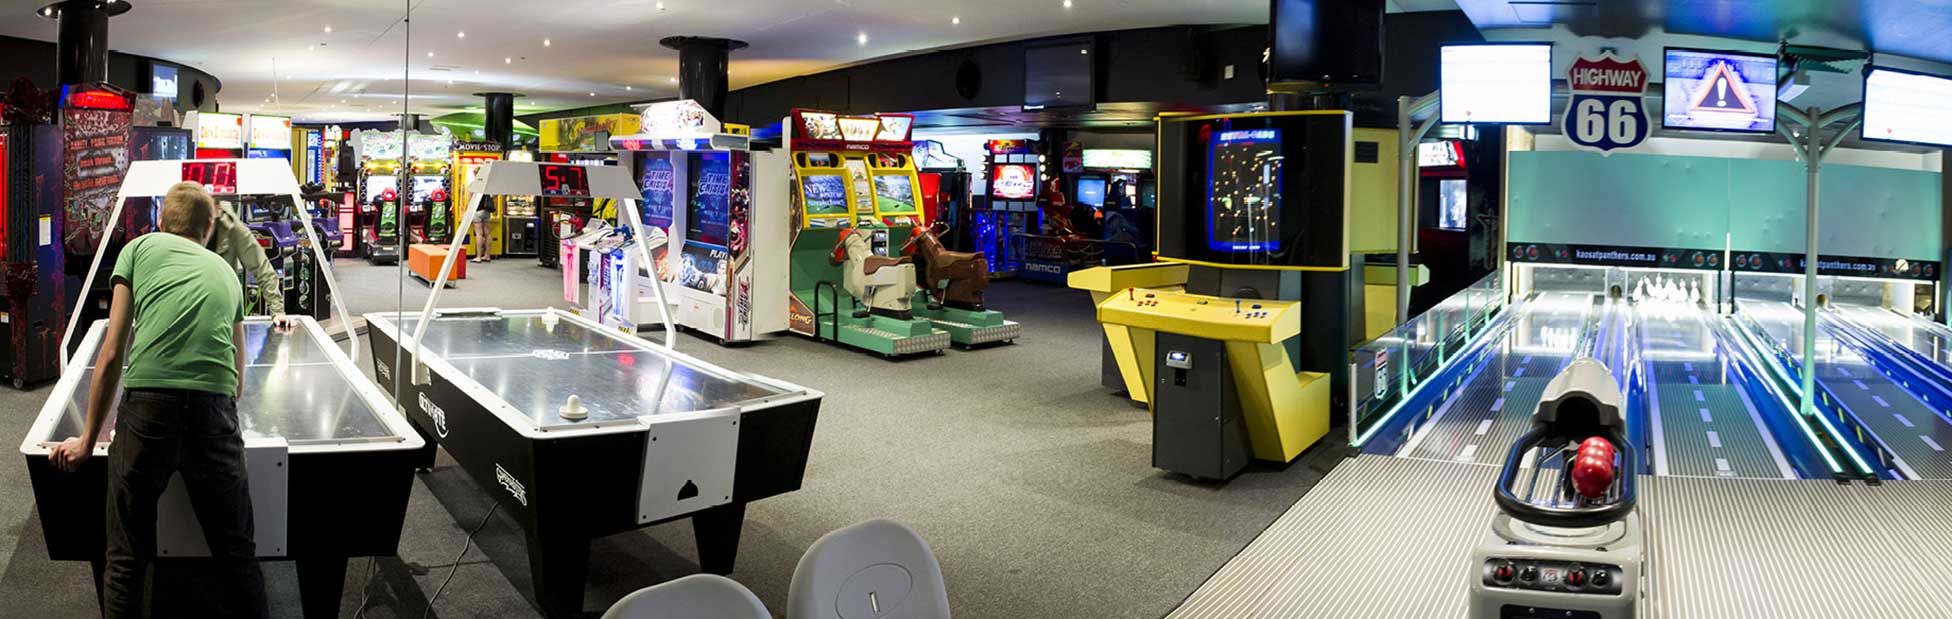 A large room filled with arcade games, pinball machines and air hockey tables